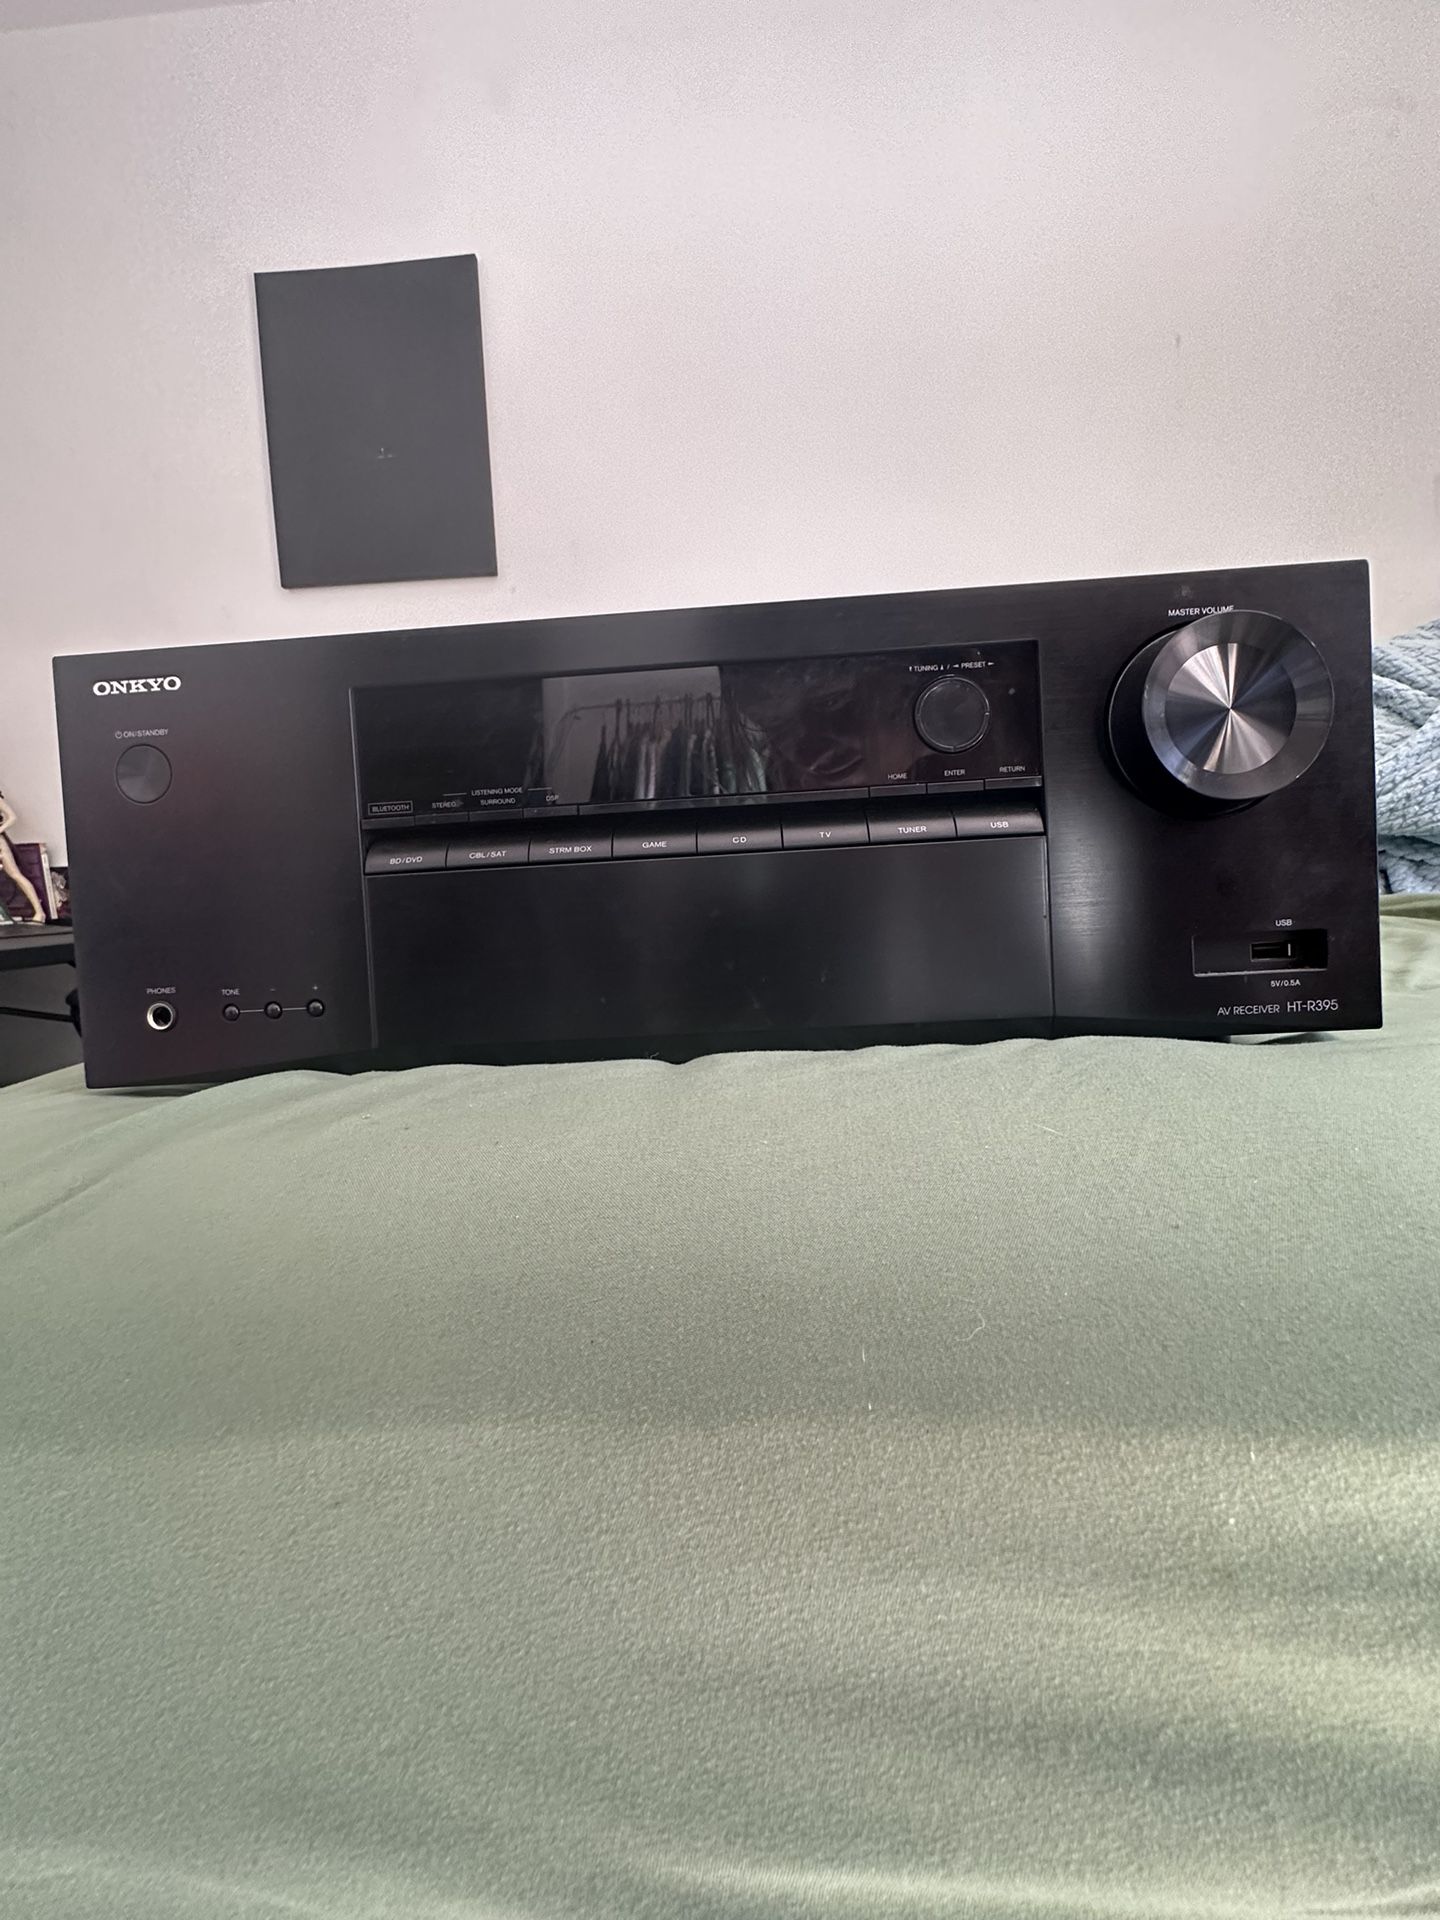 Onkyo Stereo With No Remote (comes With Projector)